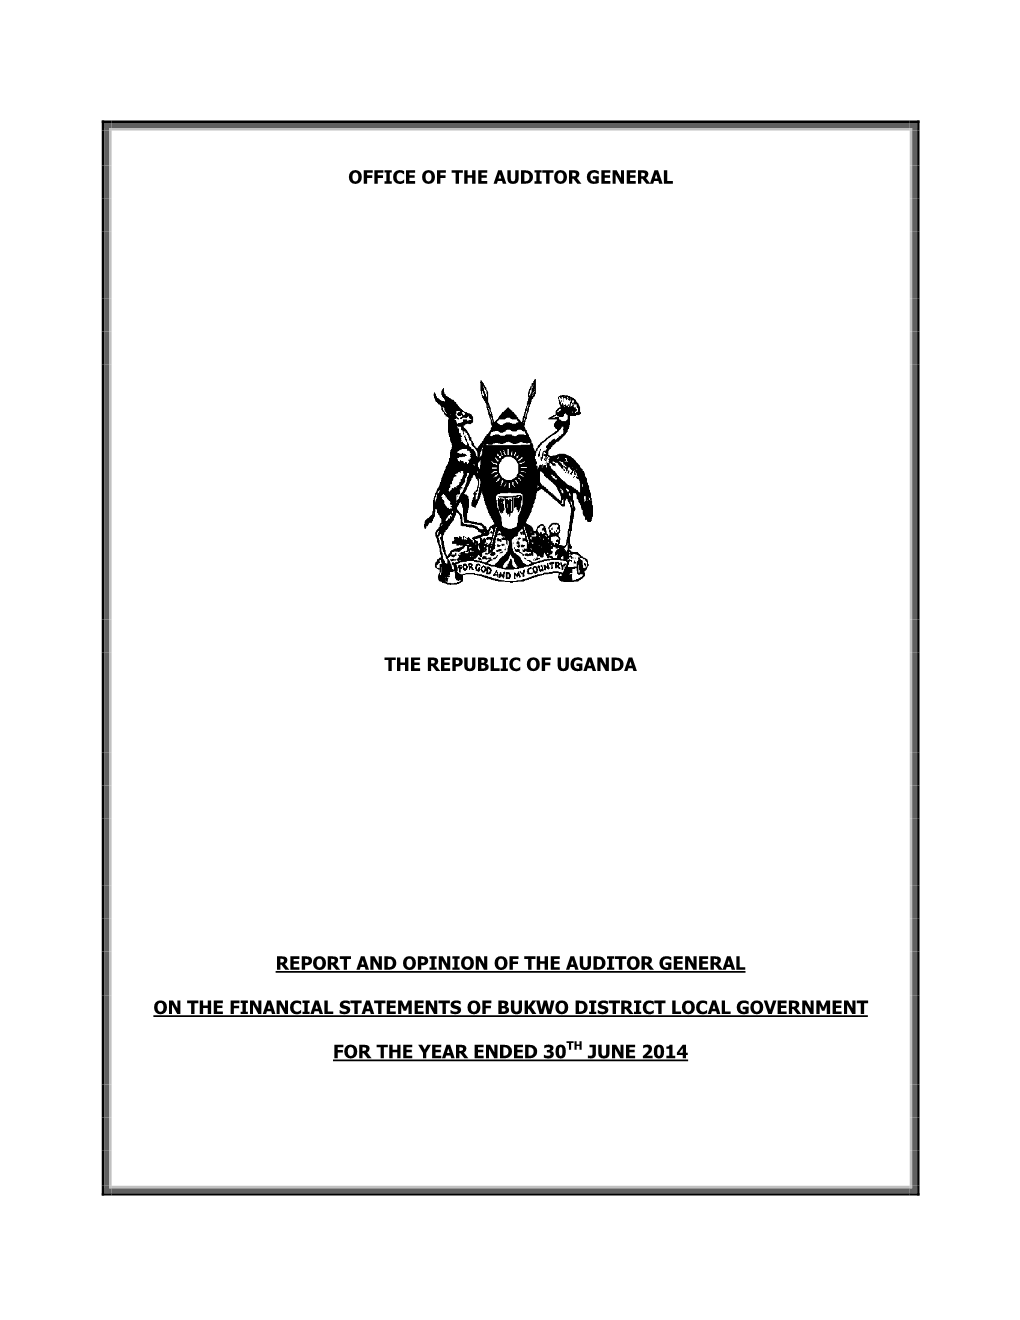 Office of the Auditor General the Republic of Uganda Report and Opinion of the Auditor General on the Financial Statements of Bu